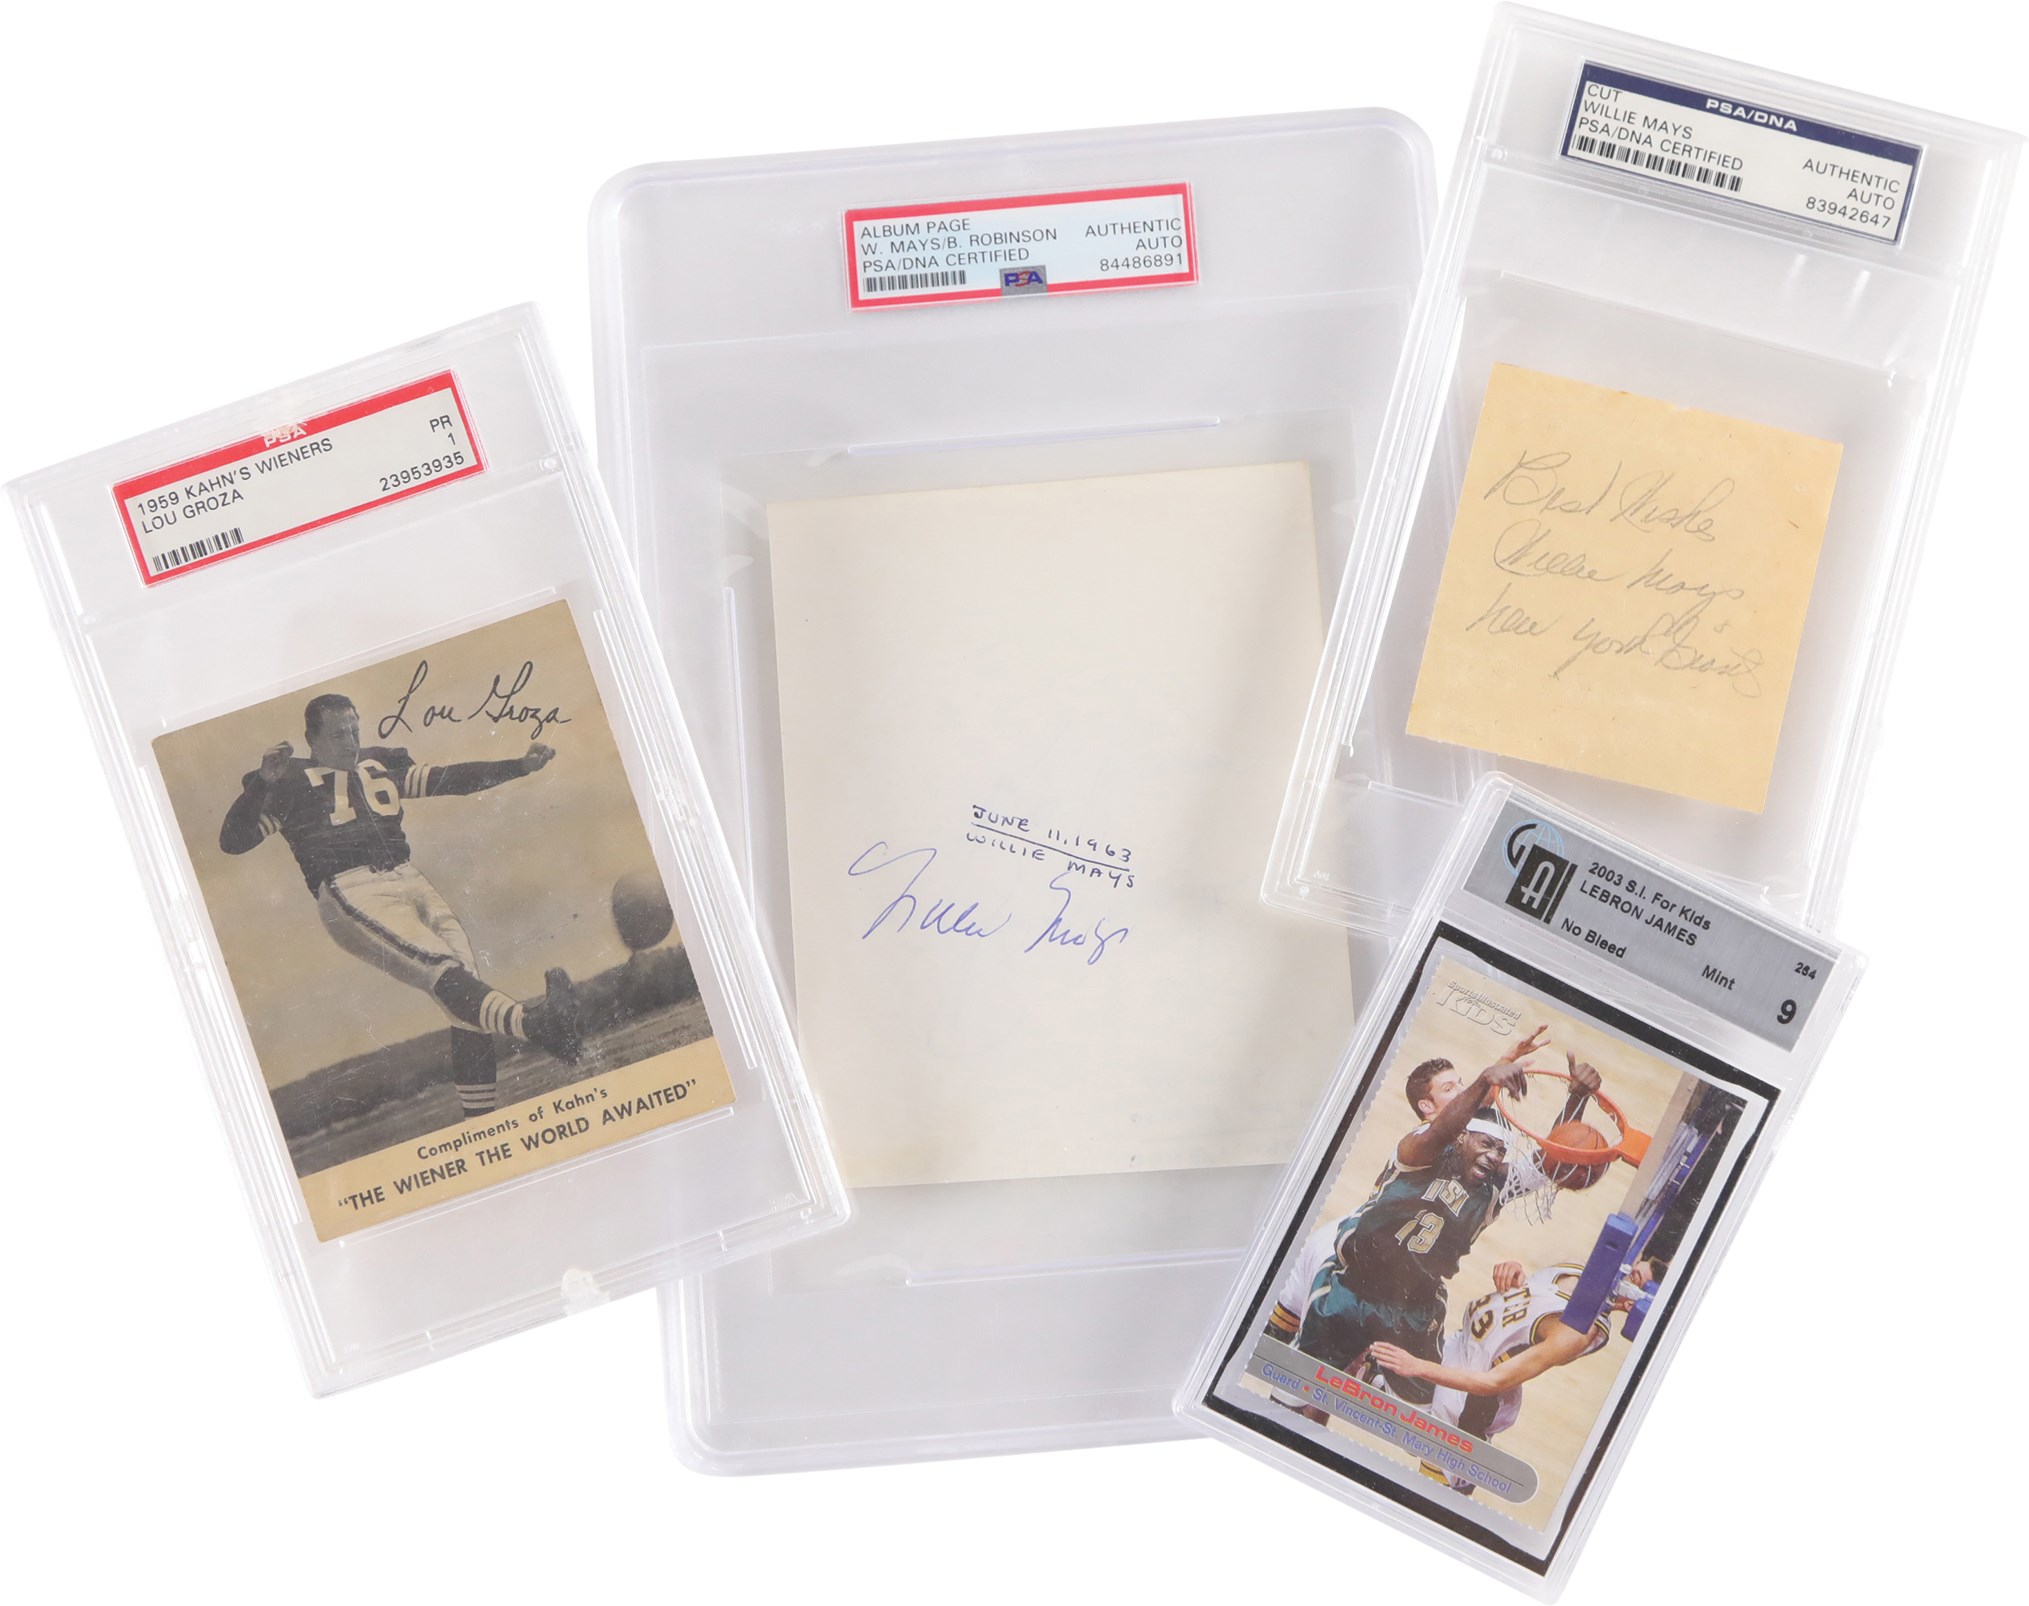 Baseball Autographs - Multi-Sport Autograph and Card Collection (16)